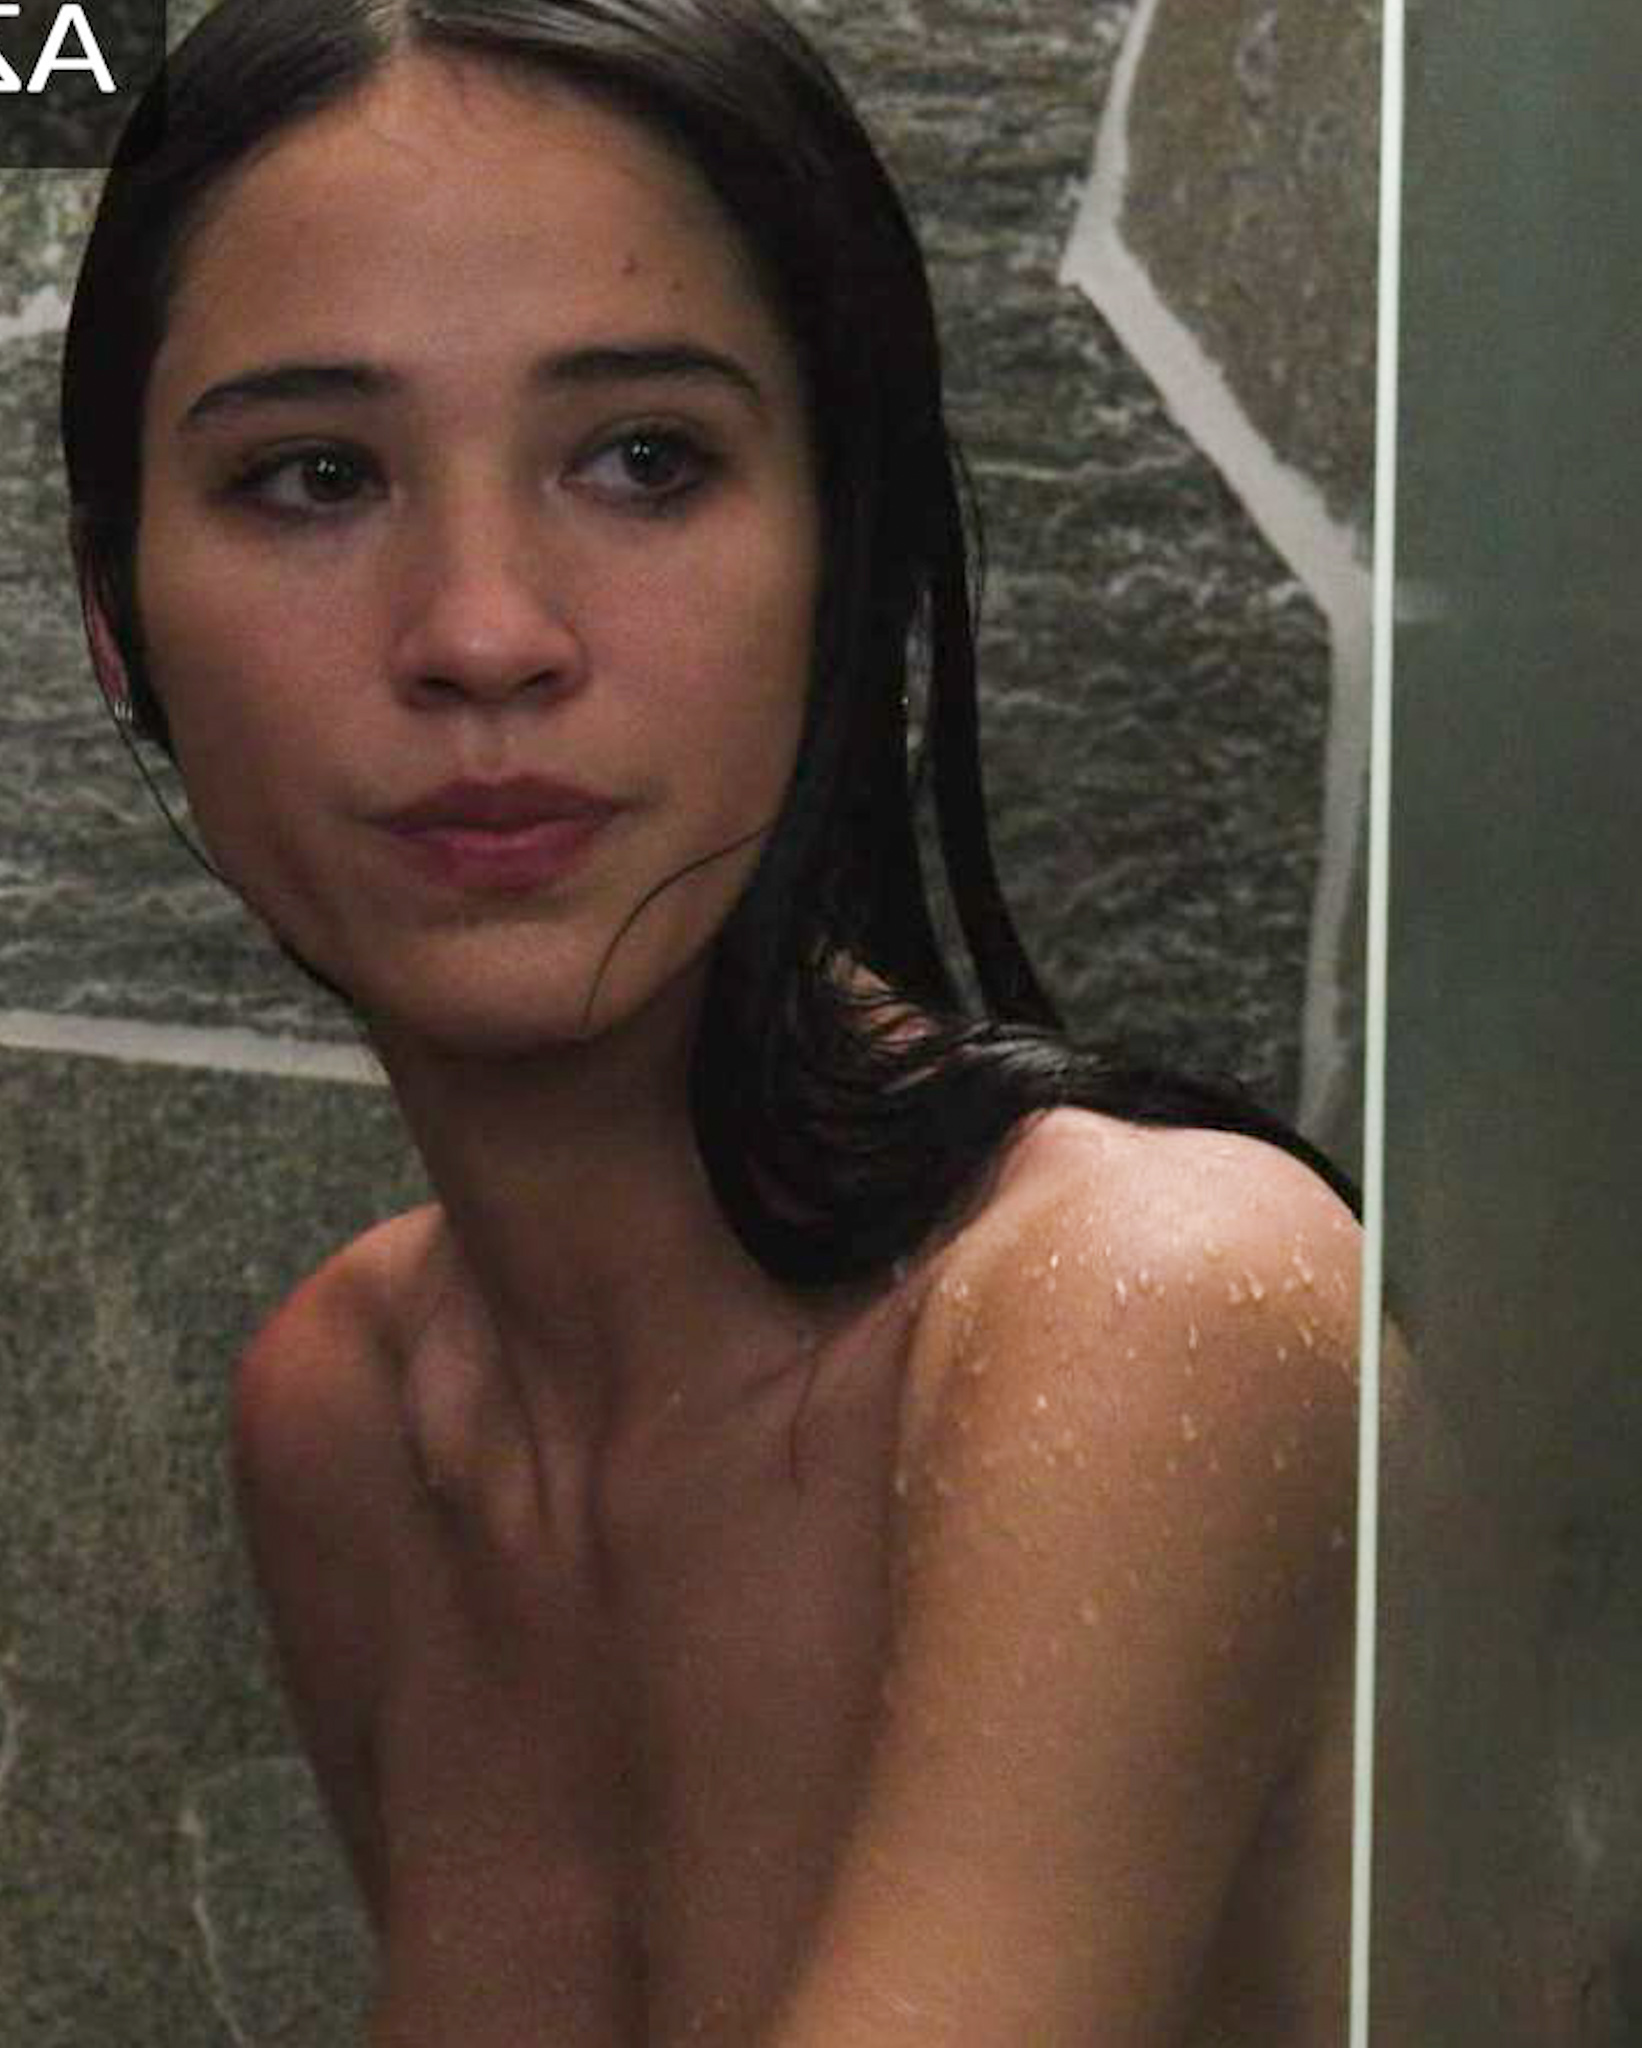 Kelsey Asbille Tits